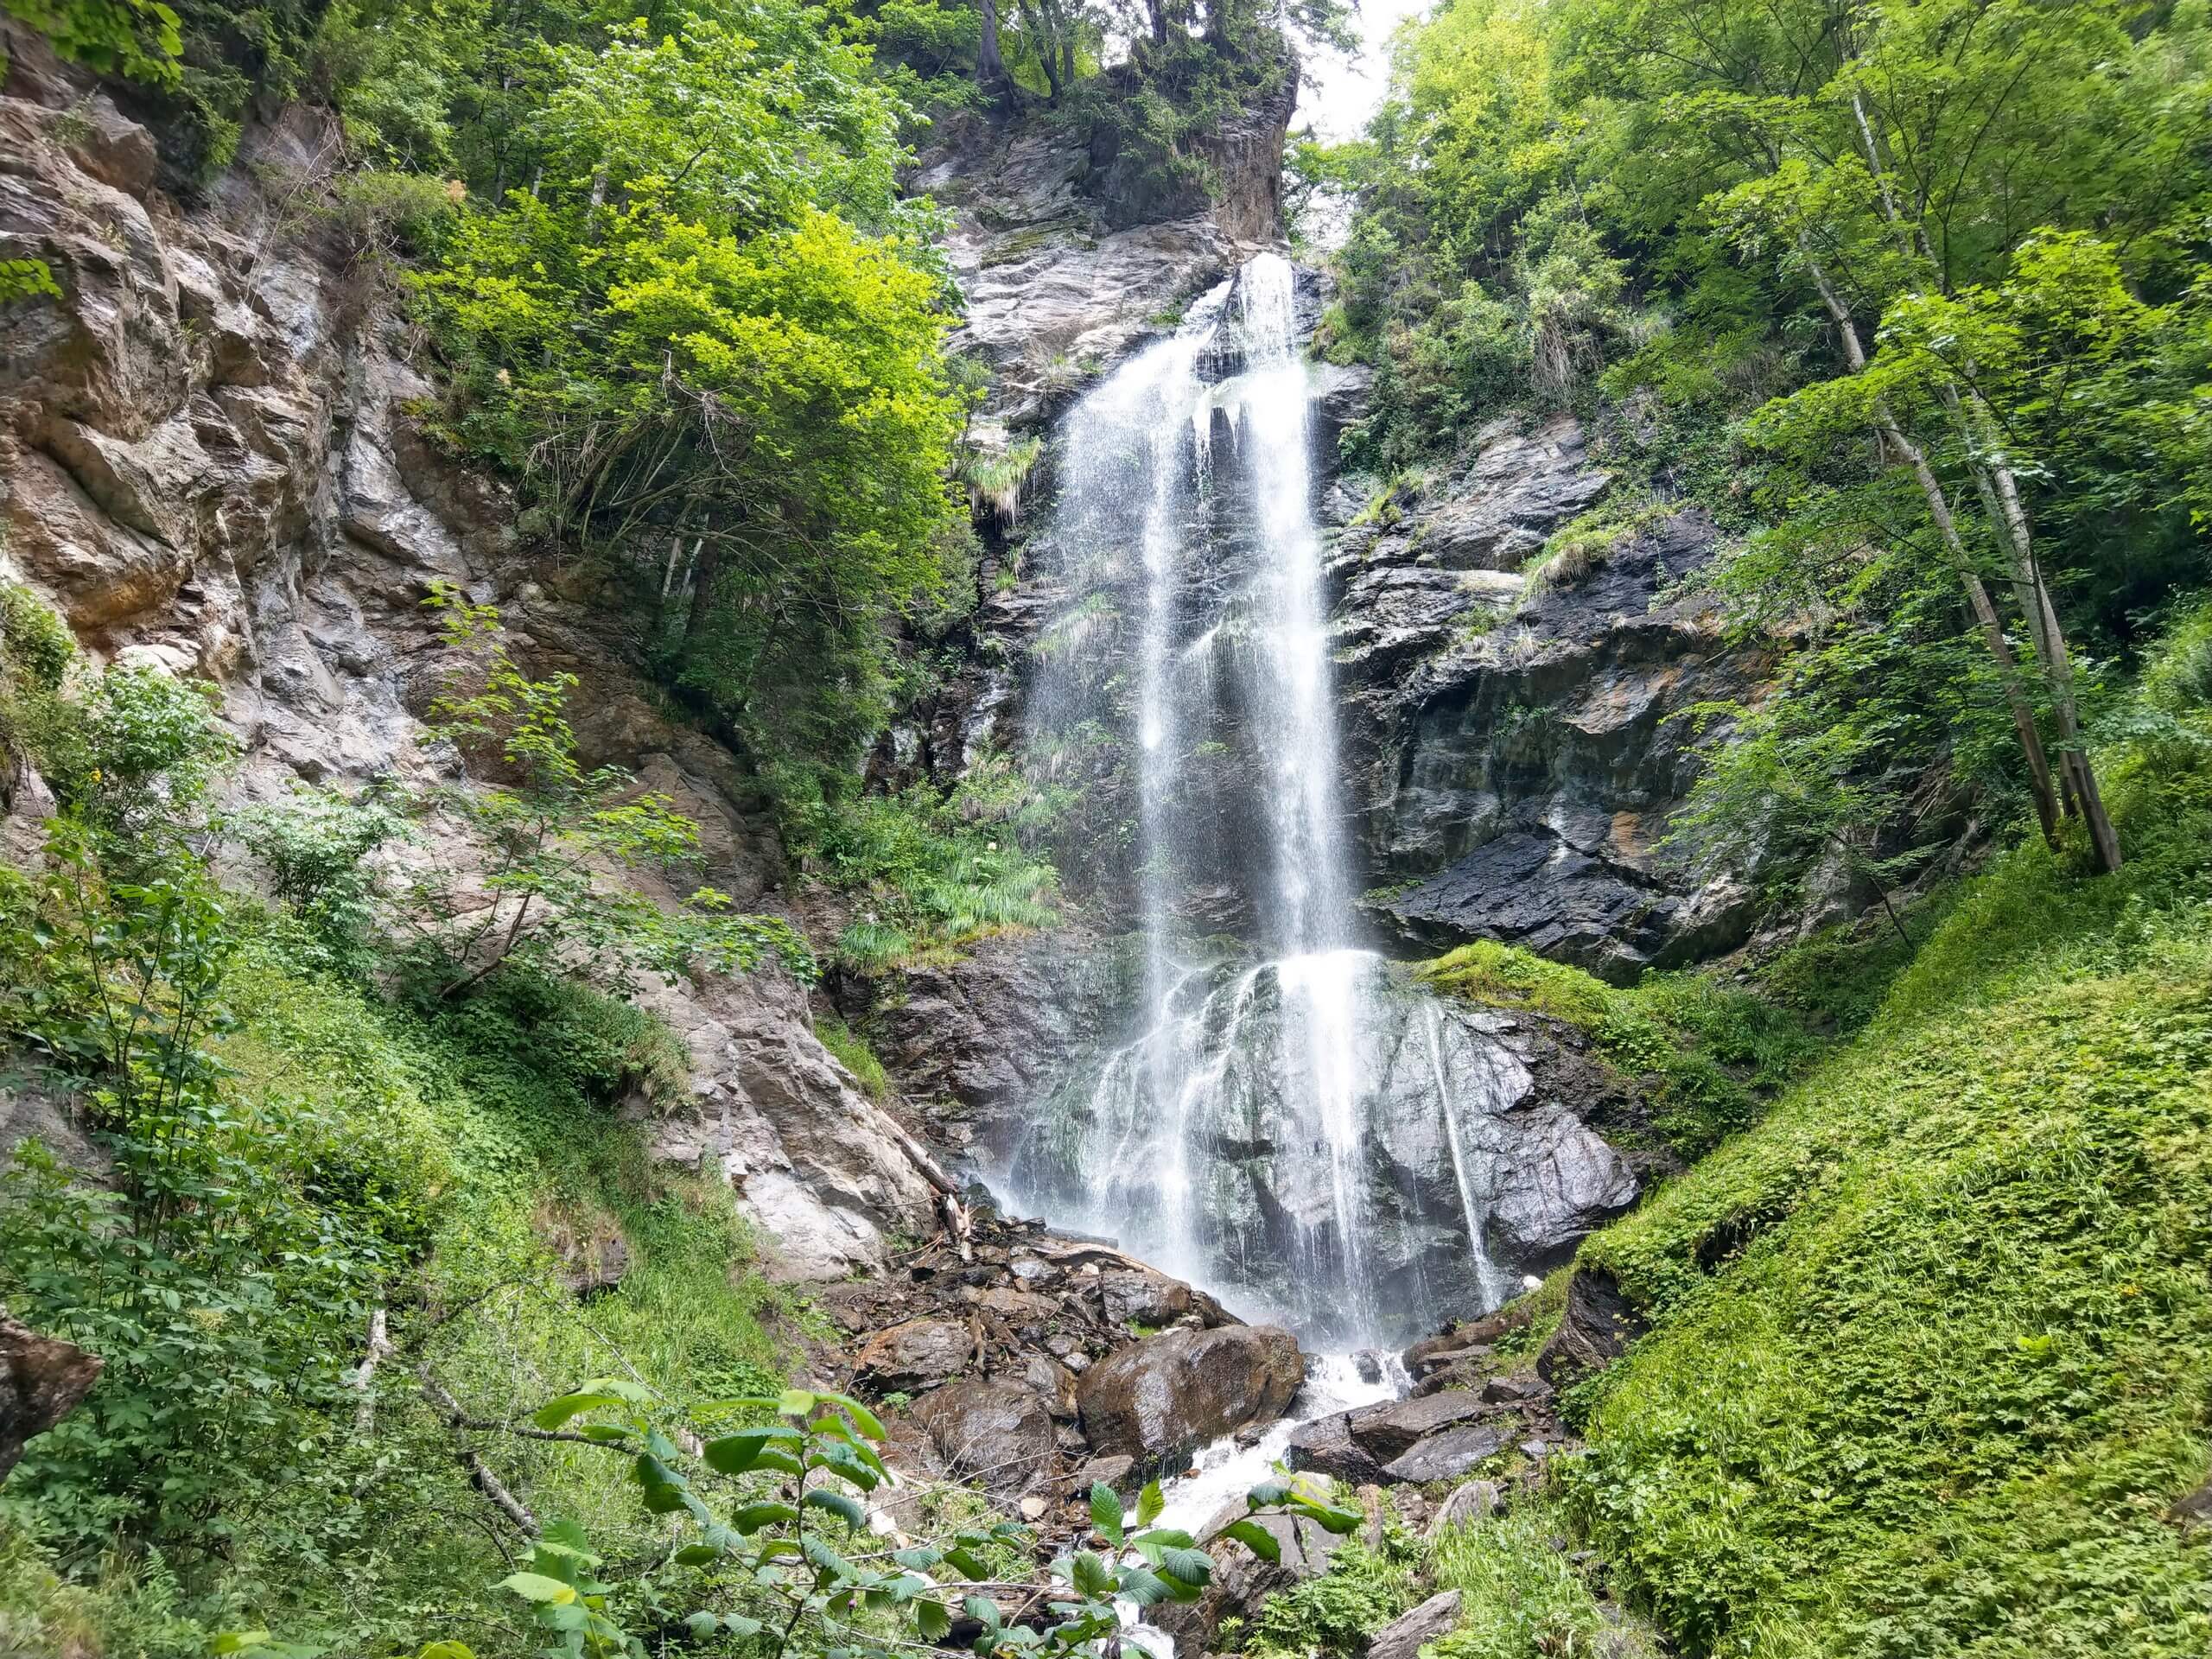 Waterfall along the Carinthian Lakes walking route in Austria